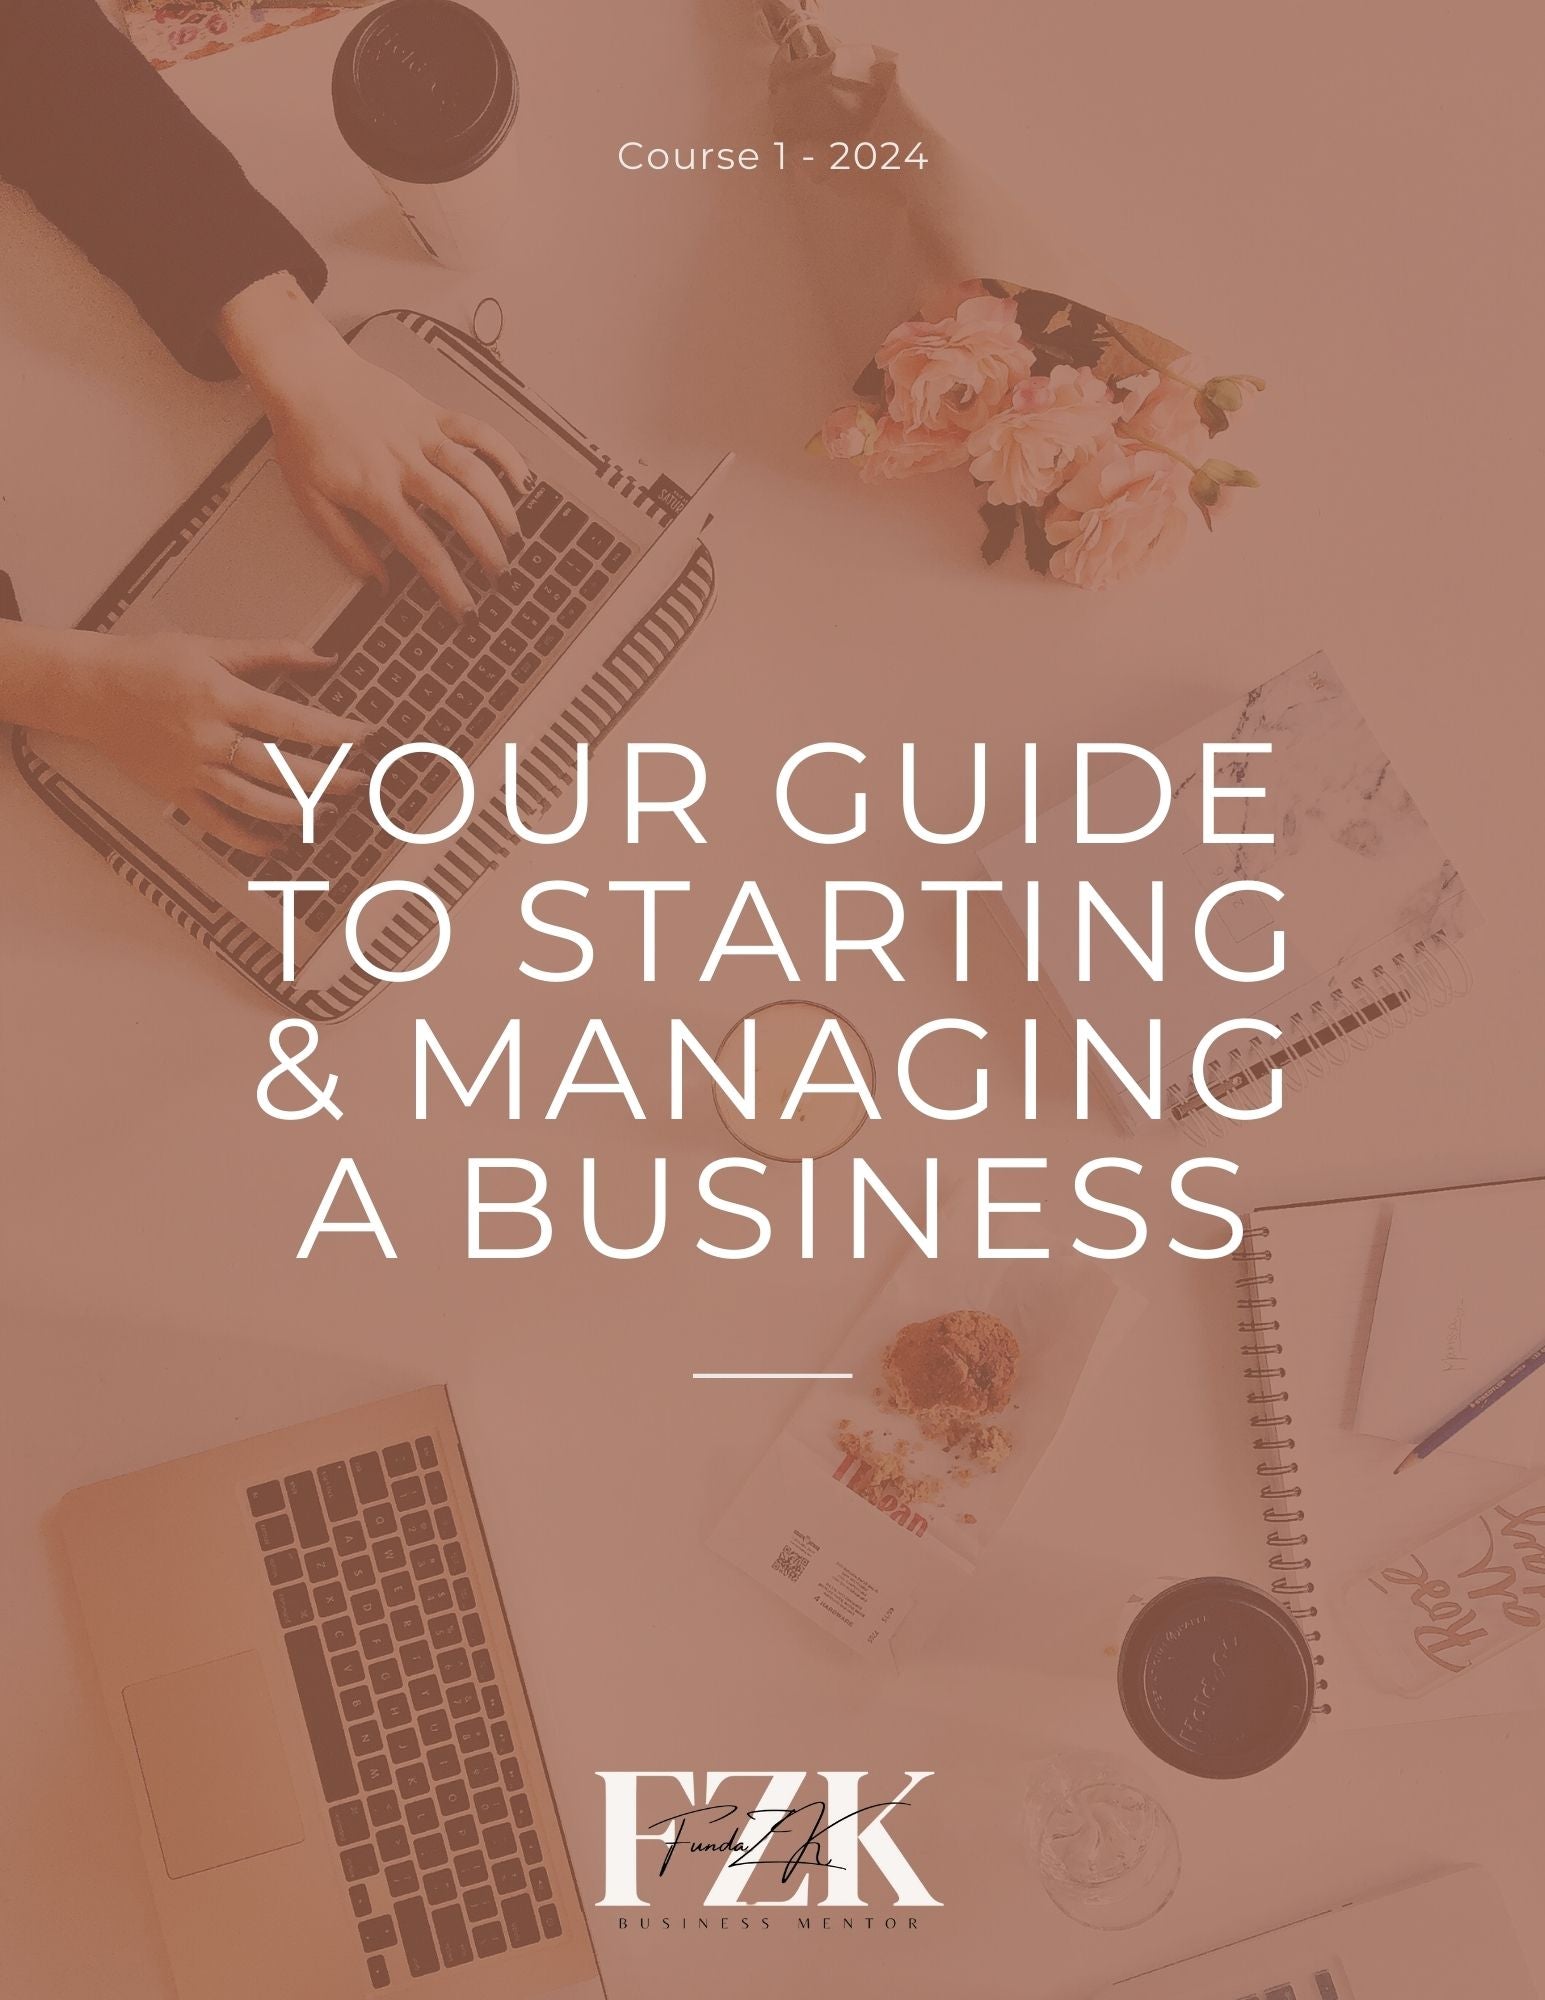 Starting & Managing a Business - Course 1 - FZK & Co. Event Paper